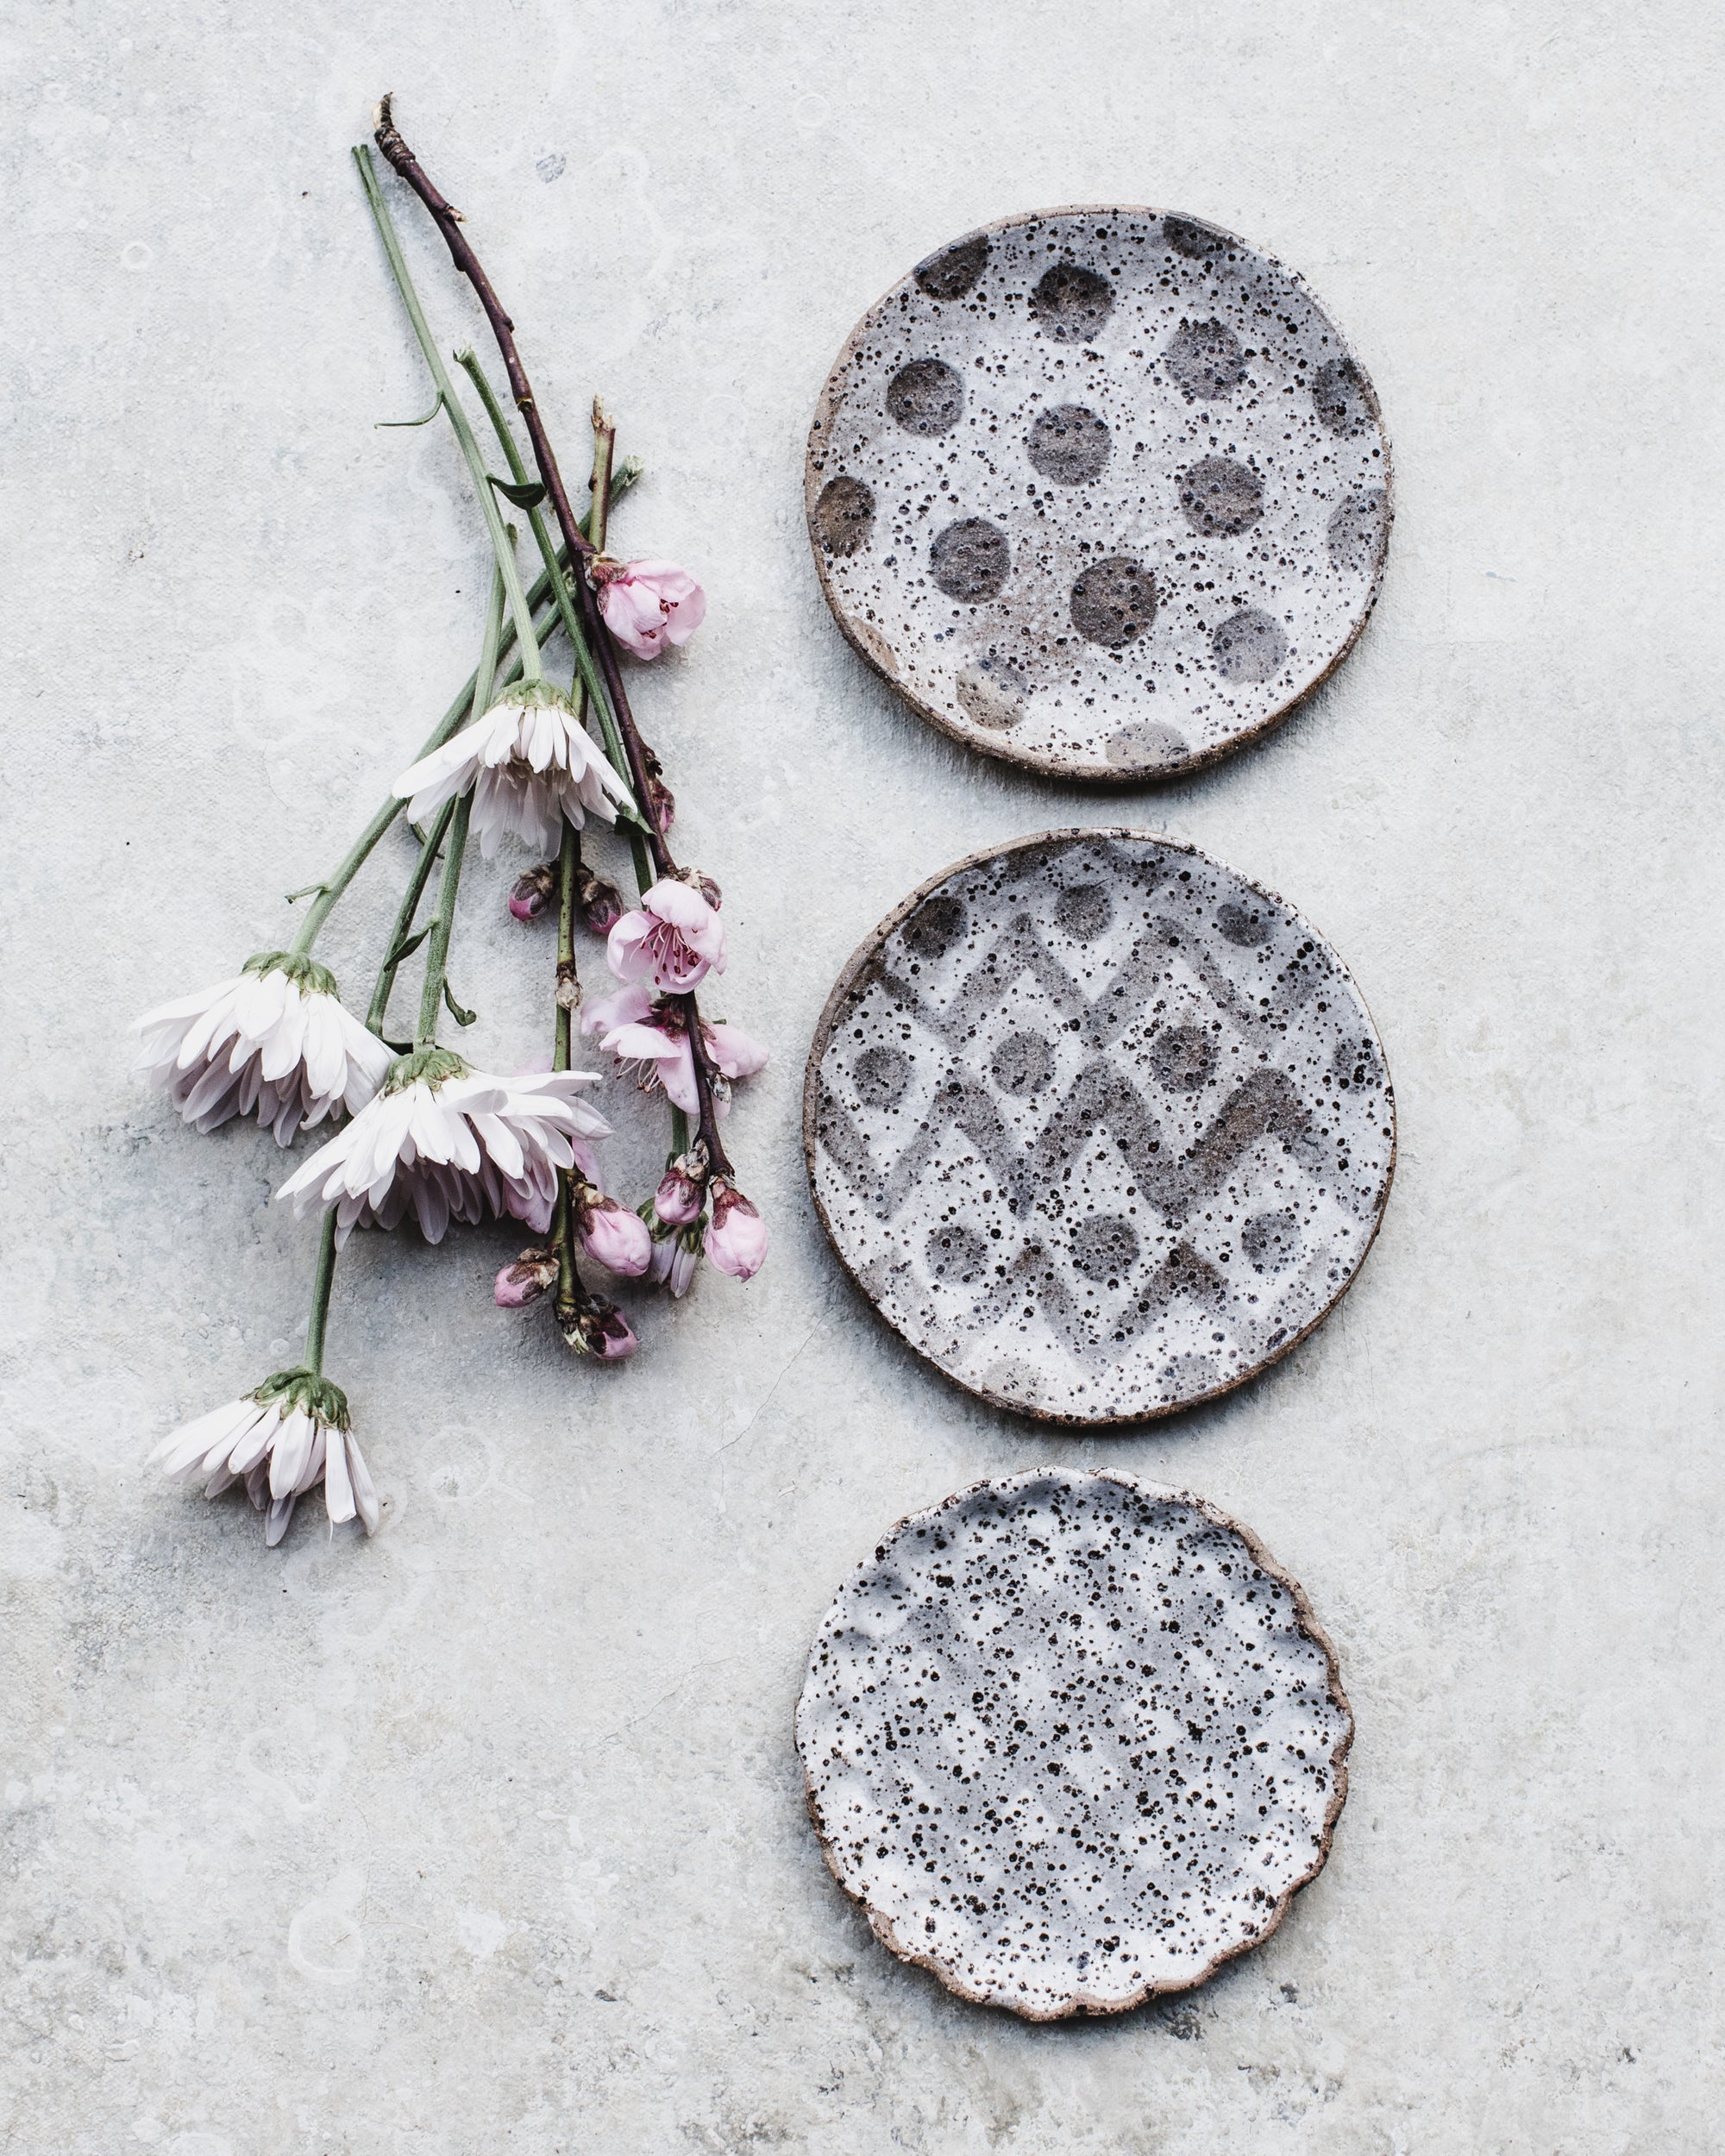 Small rustic gritty treat plates